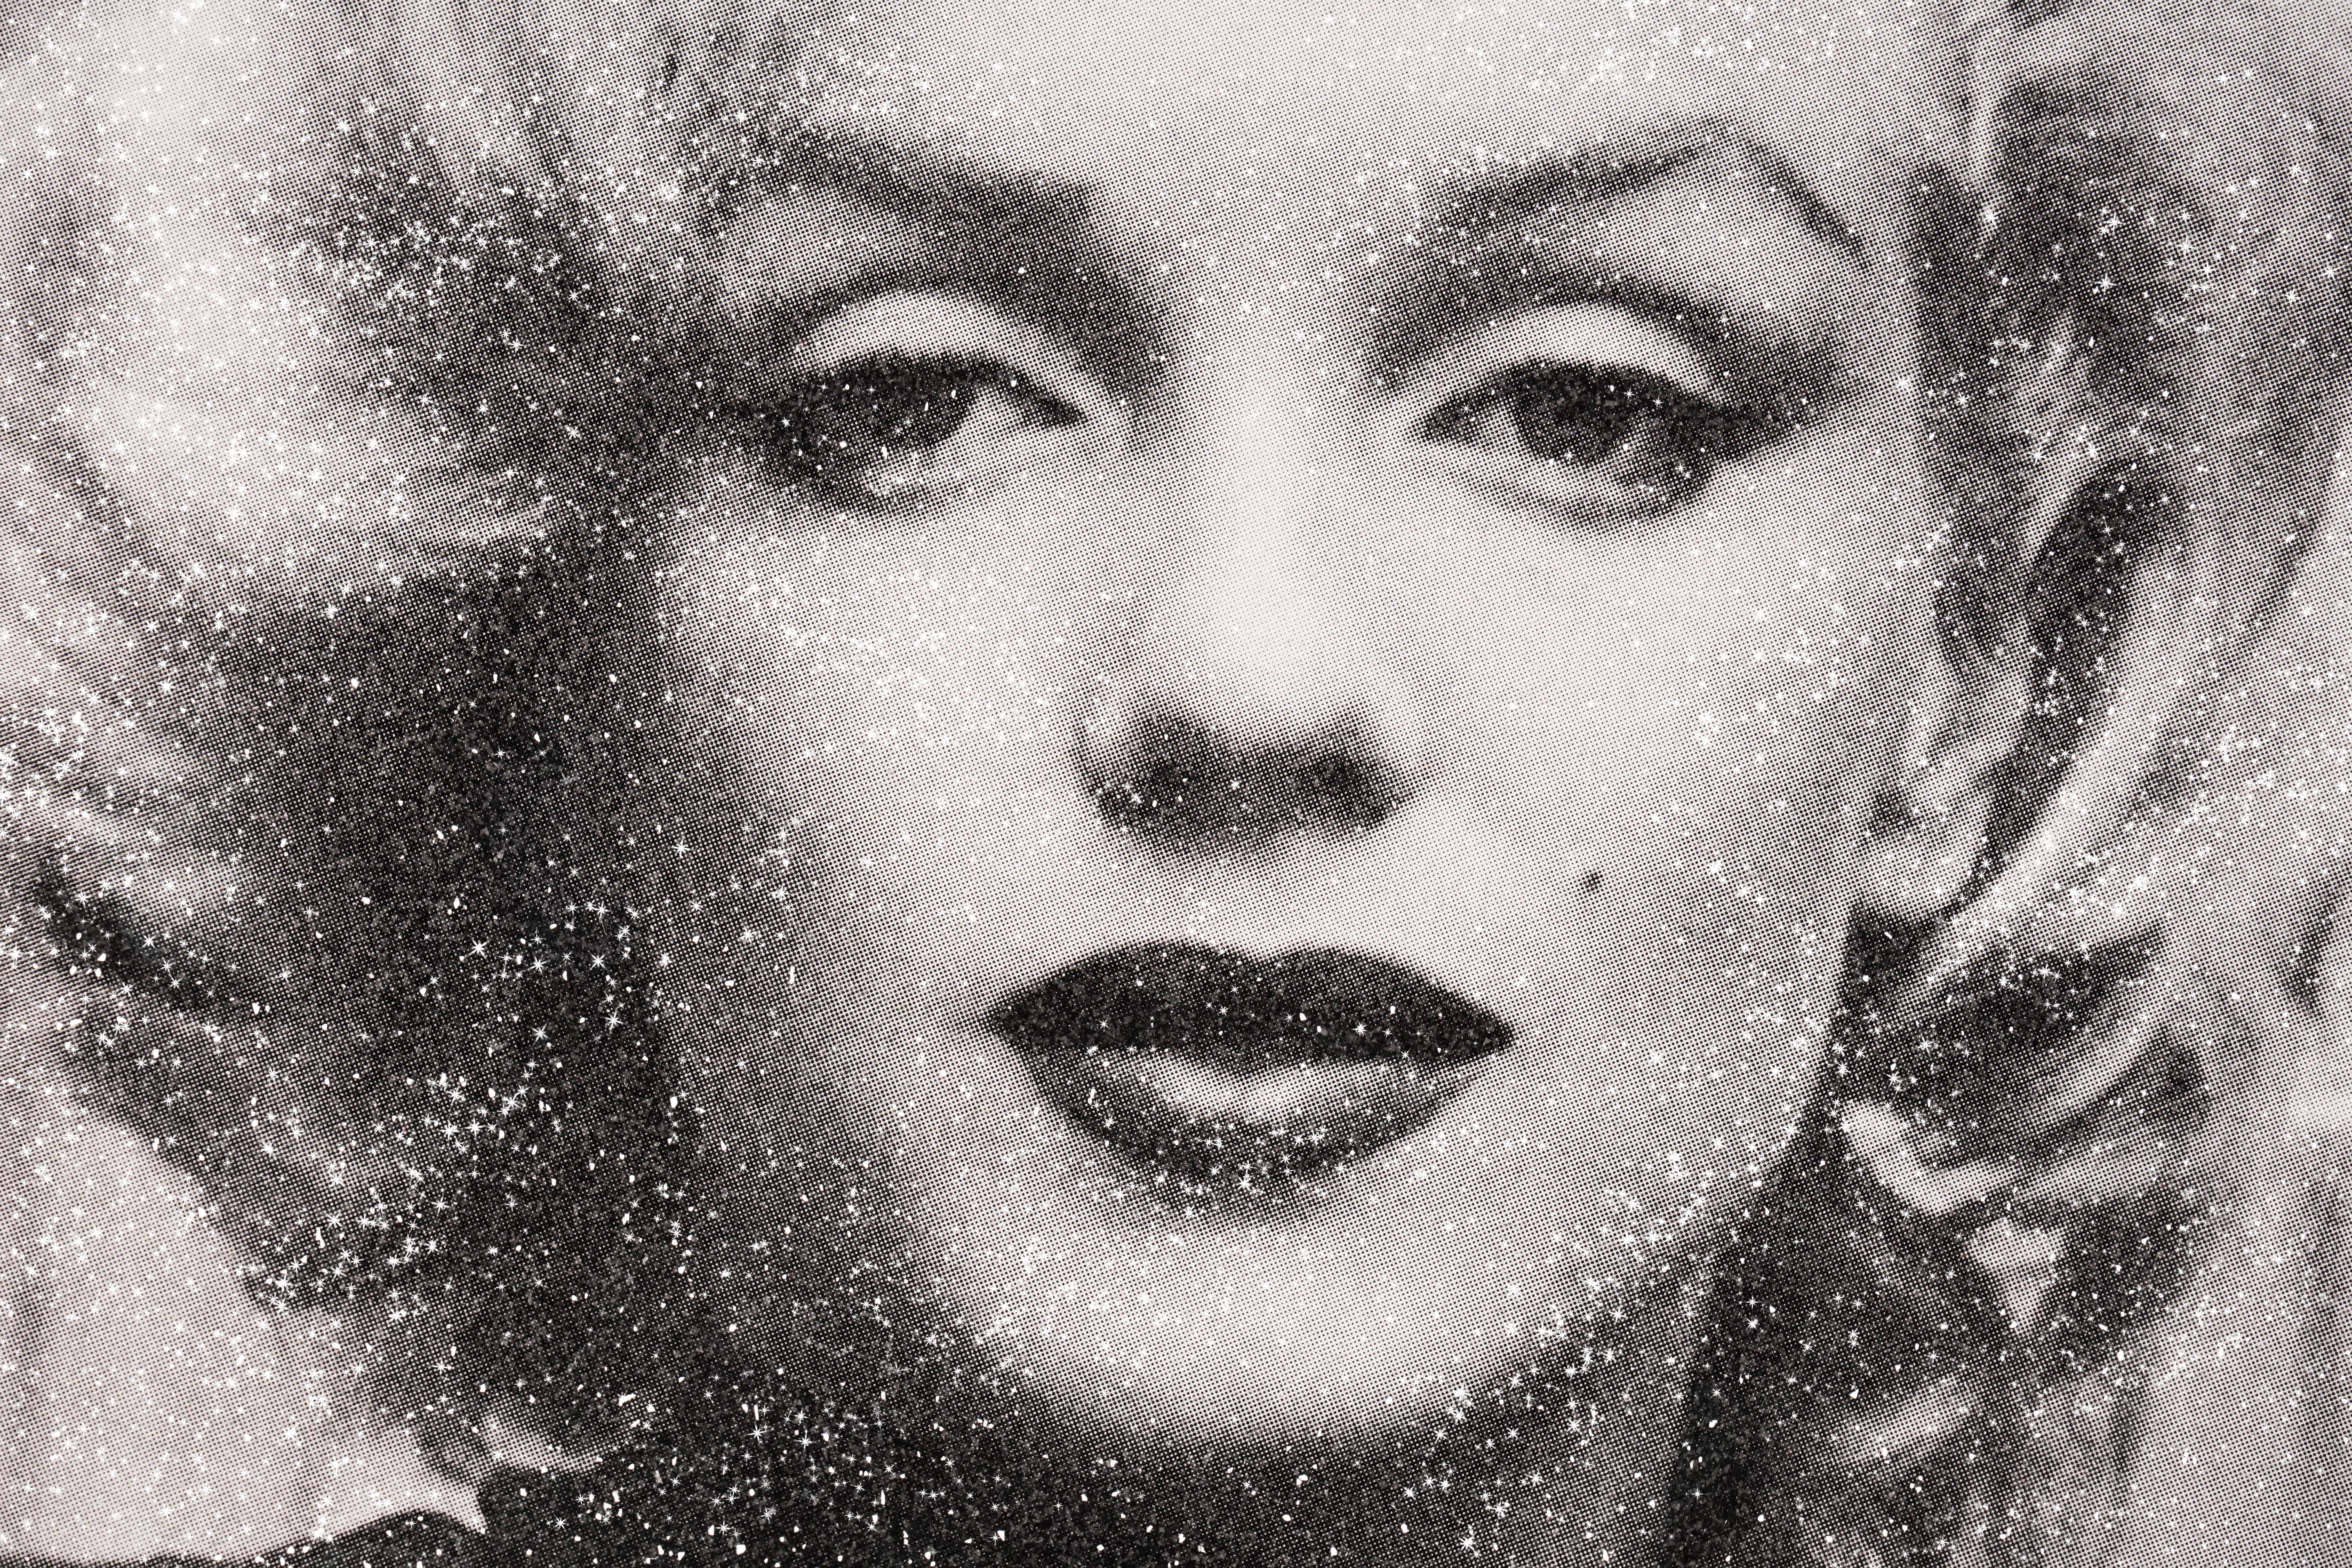 Russell Young, Marilyn with Diamond Dust in Black & White,  2019 1